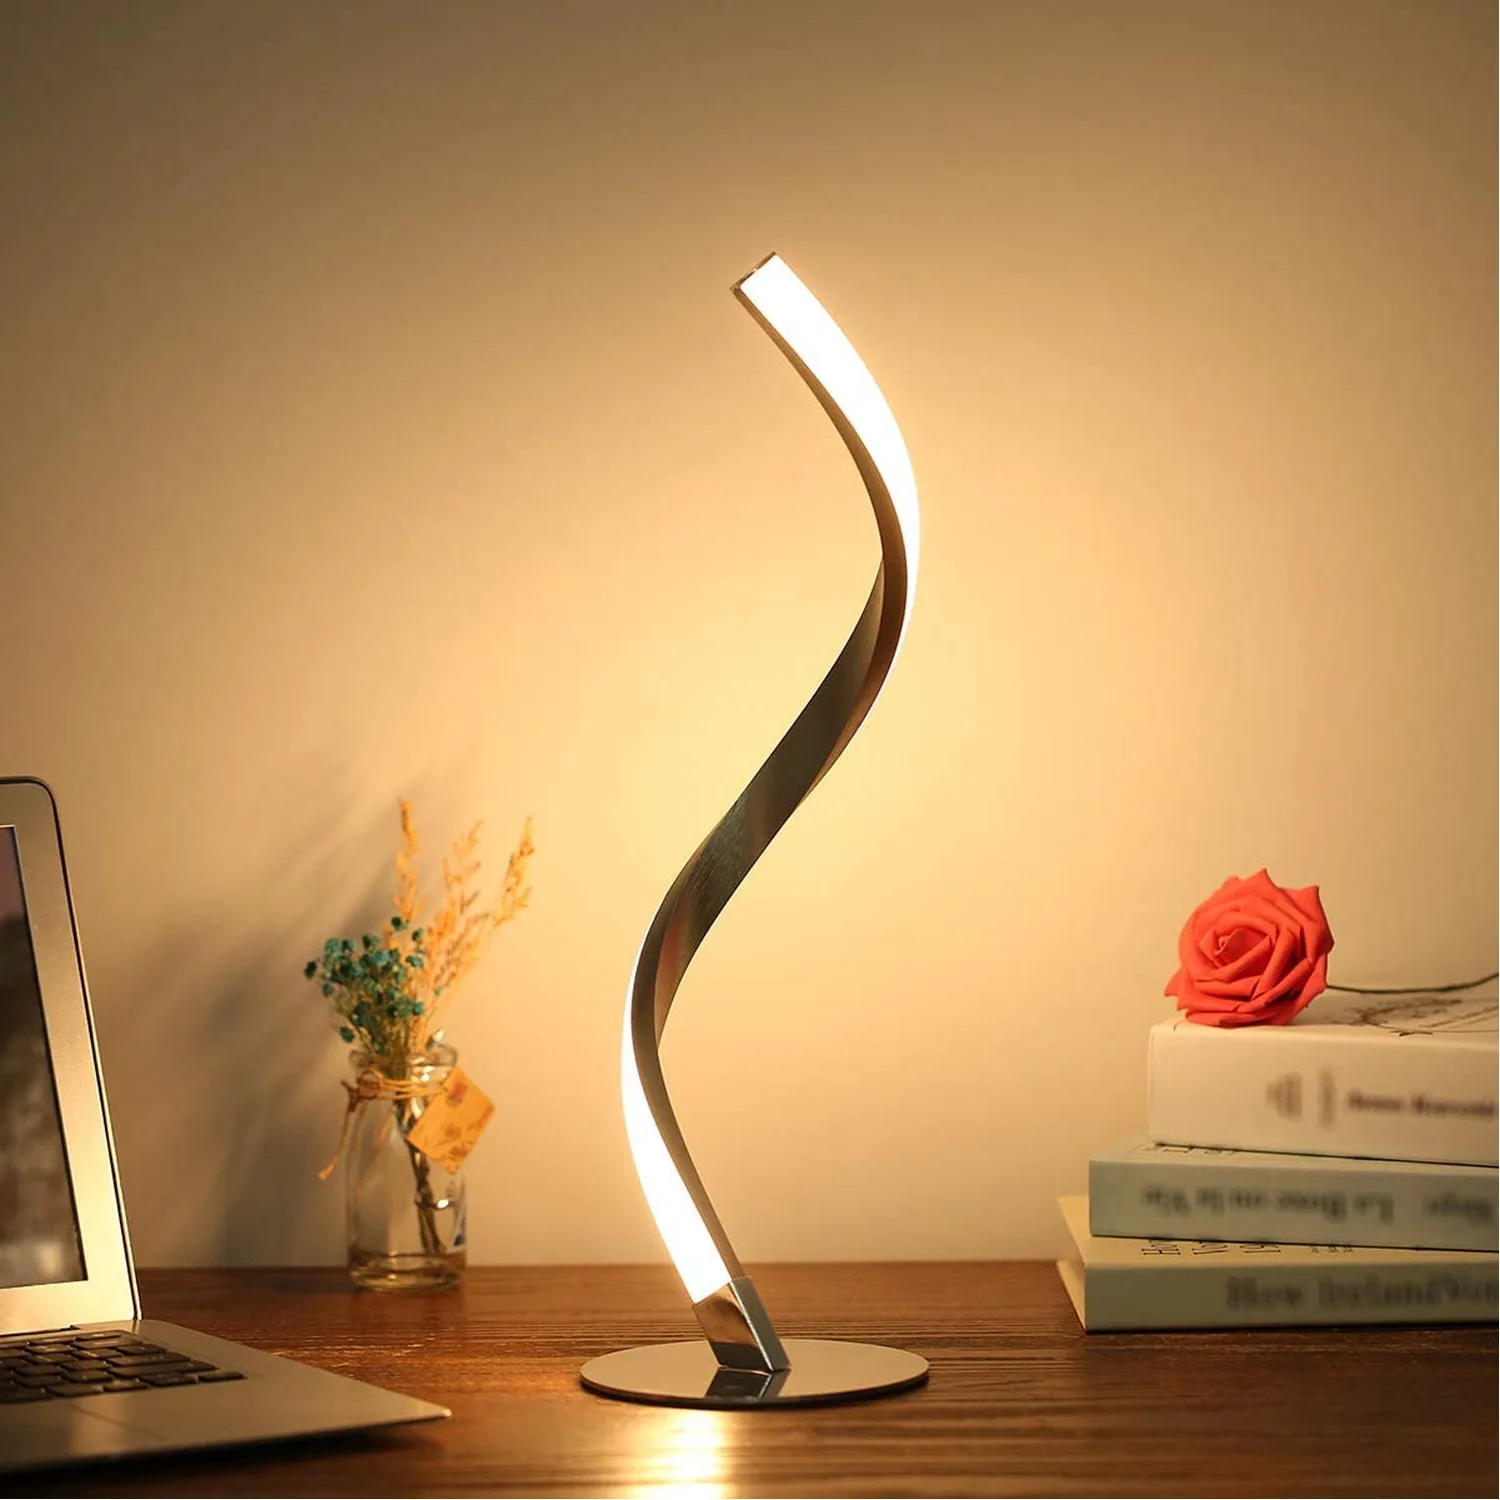 snake-shaped-creative-desk-lamp-learn-to-read-led-touch-dimming